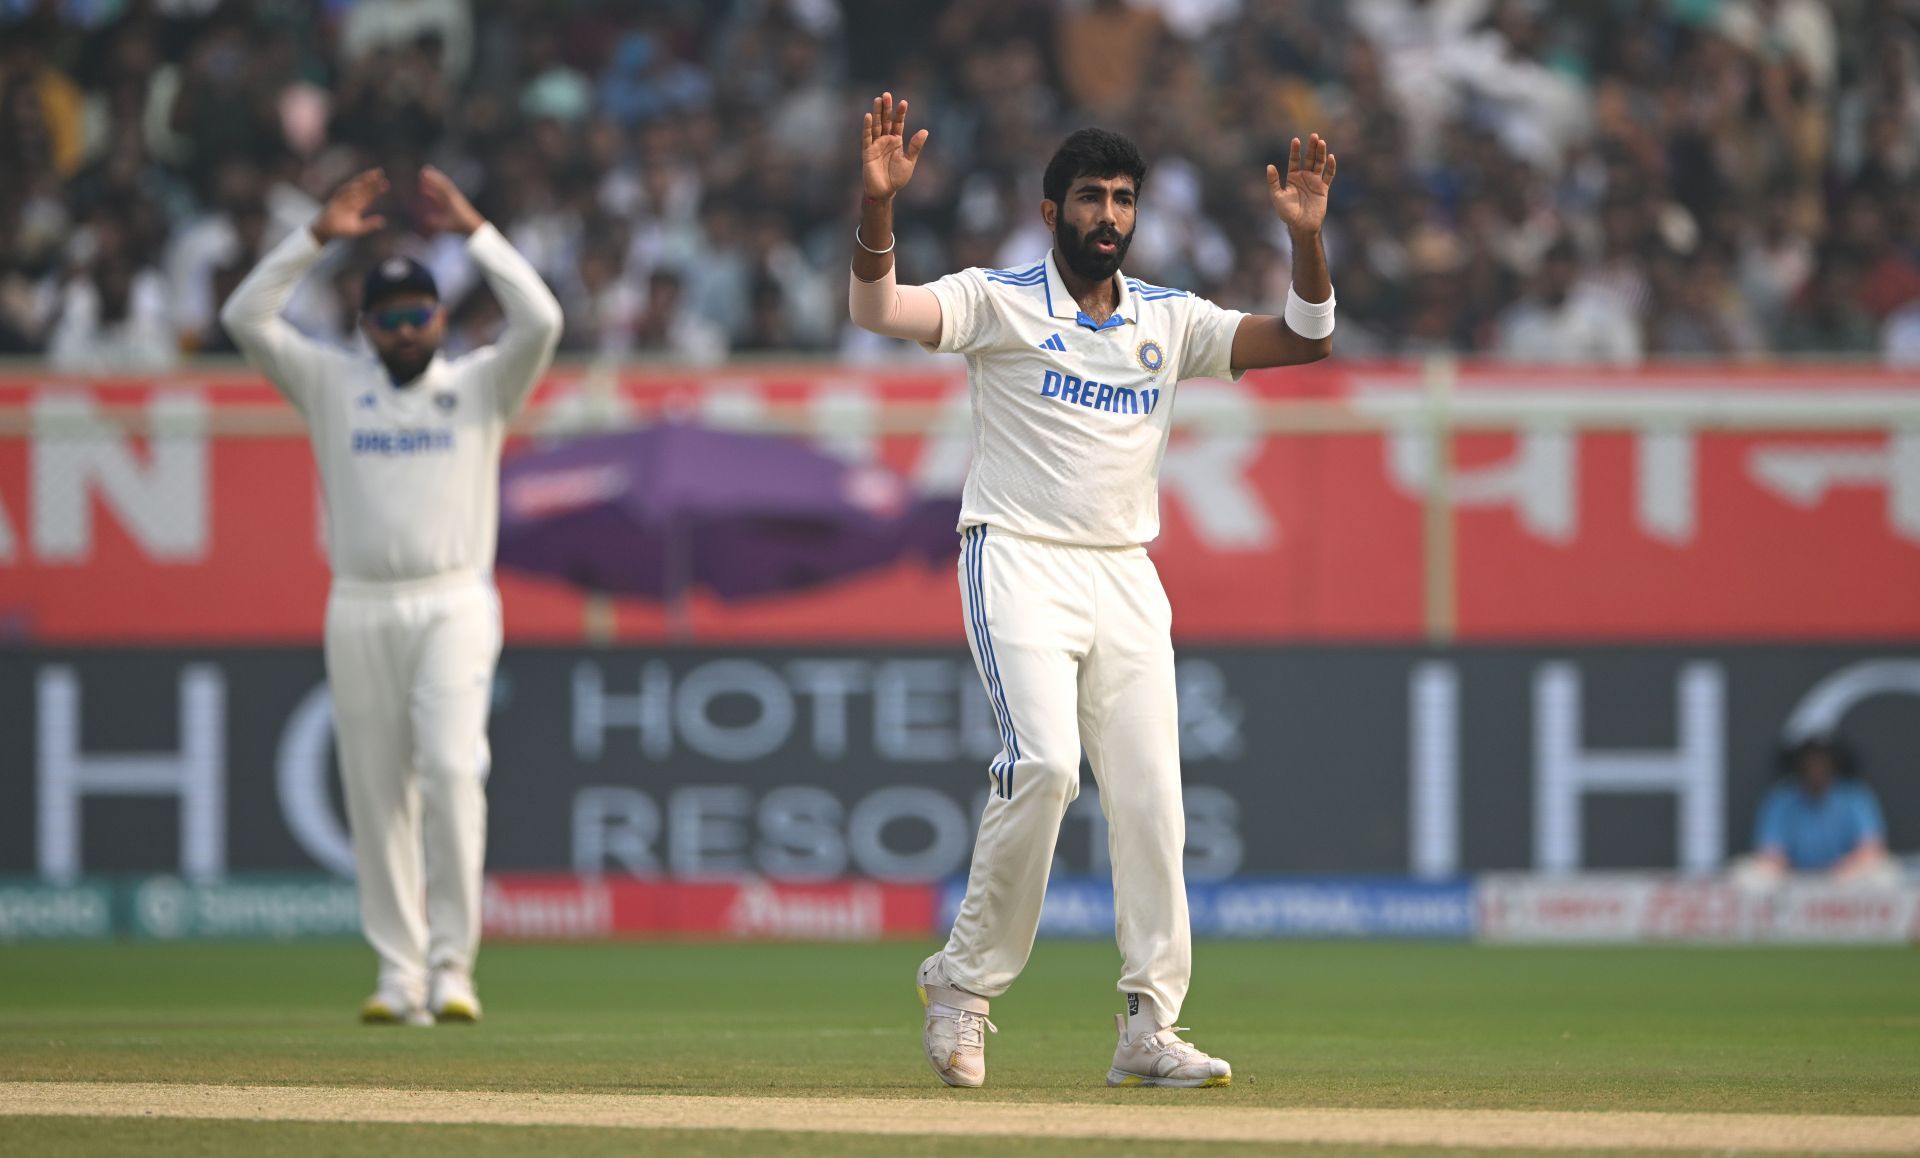 Jasprit Bumrah was awarded the Player of the Match for his game-defining spells. [P/C: Getty]